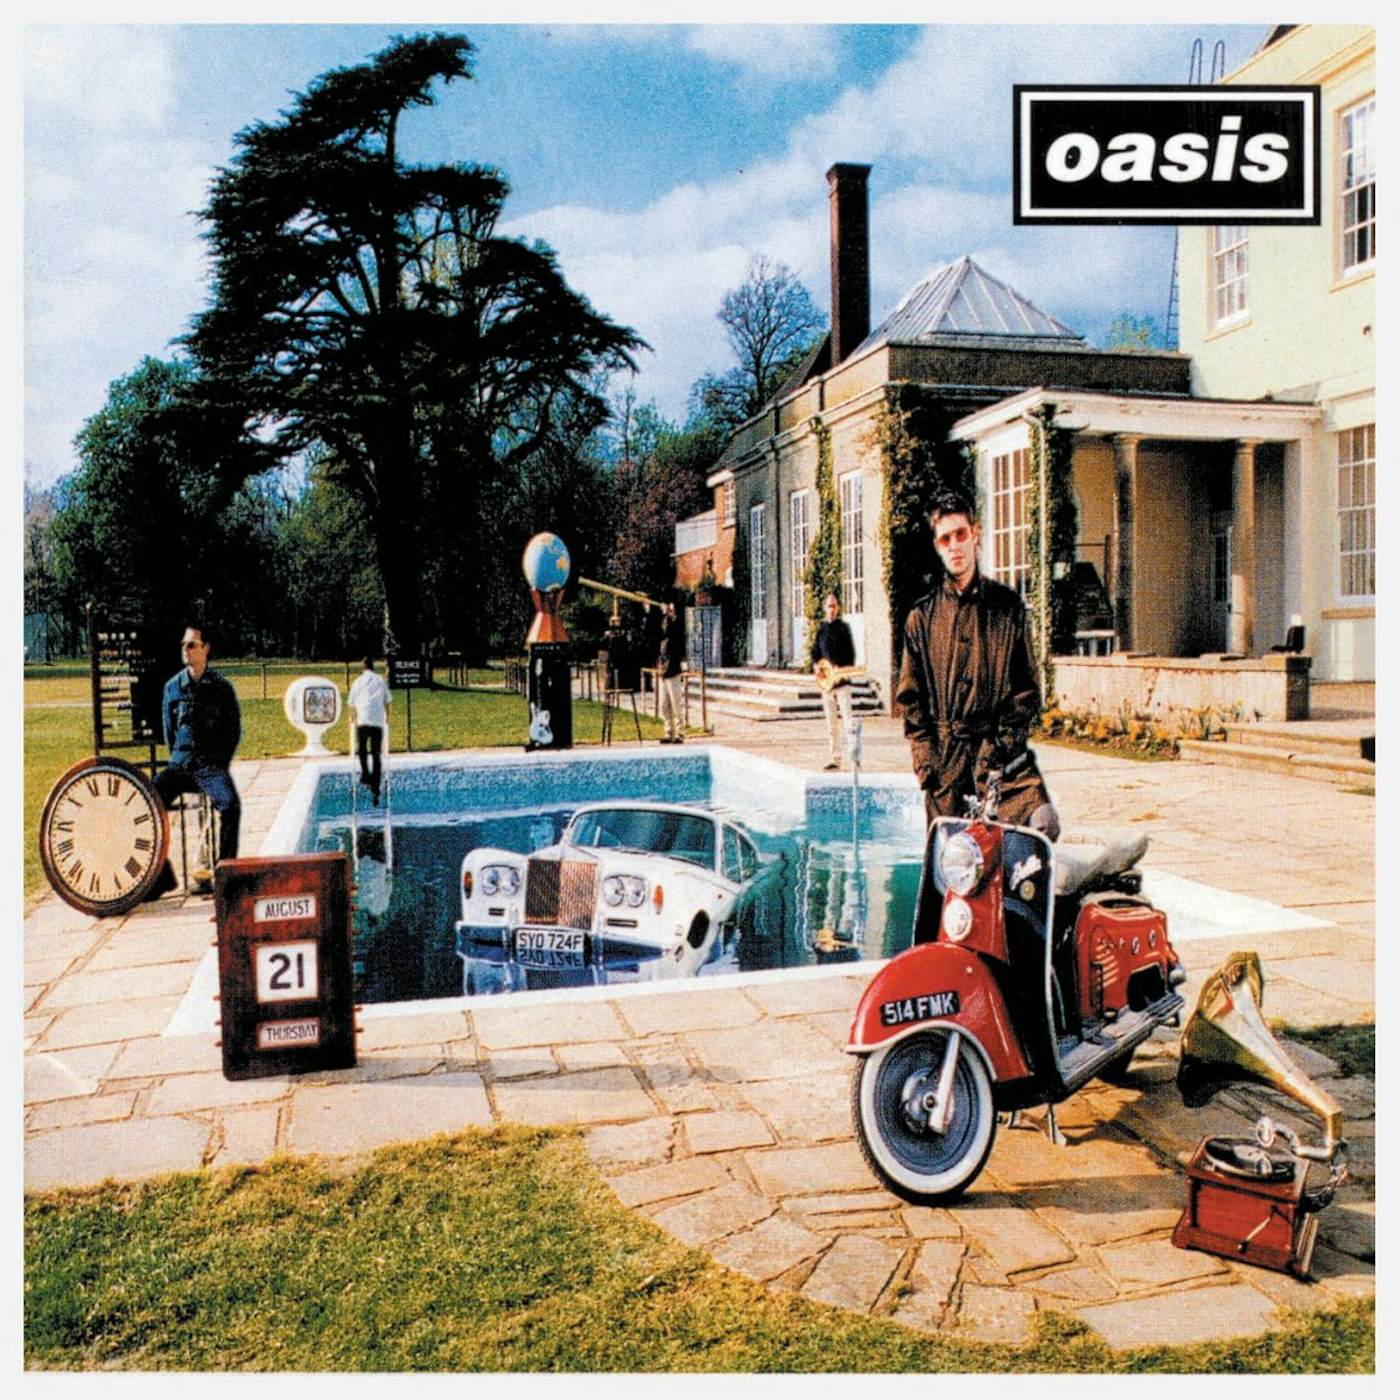 Oasis Be Here Now Vinyl Record